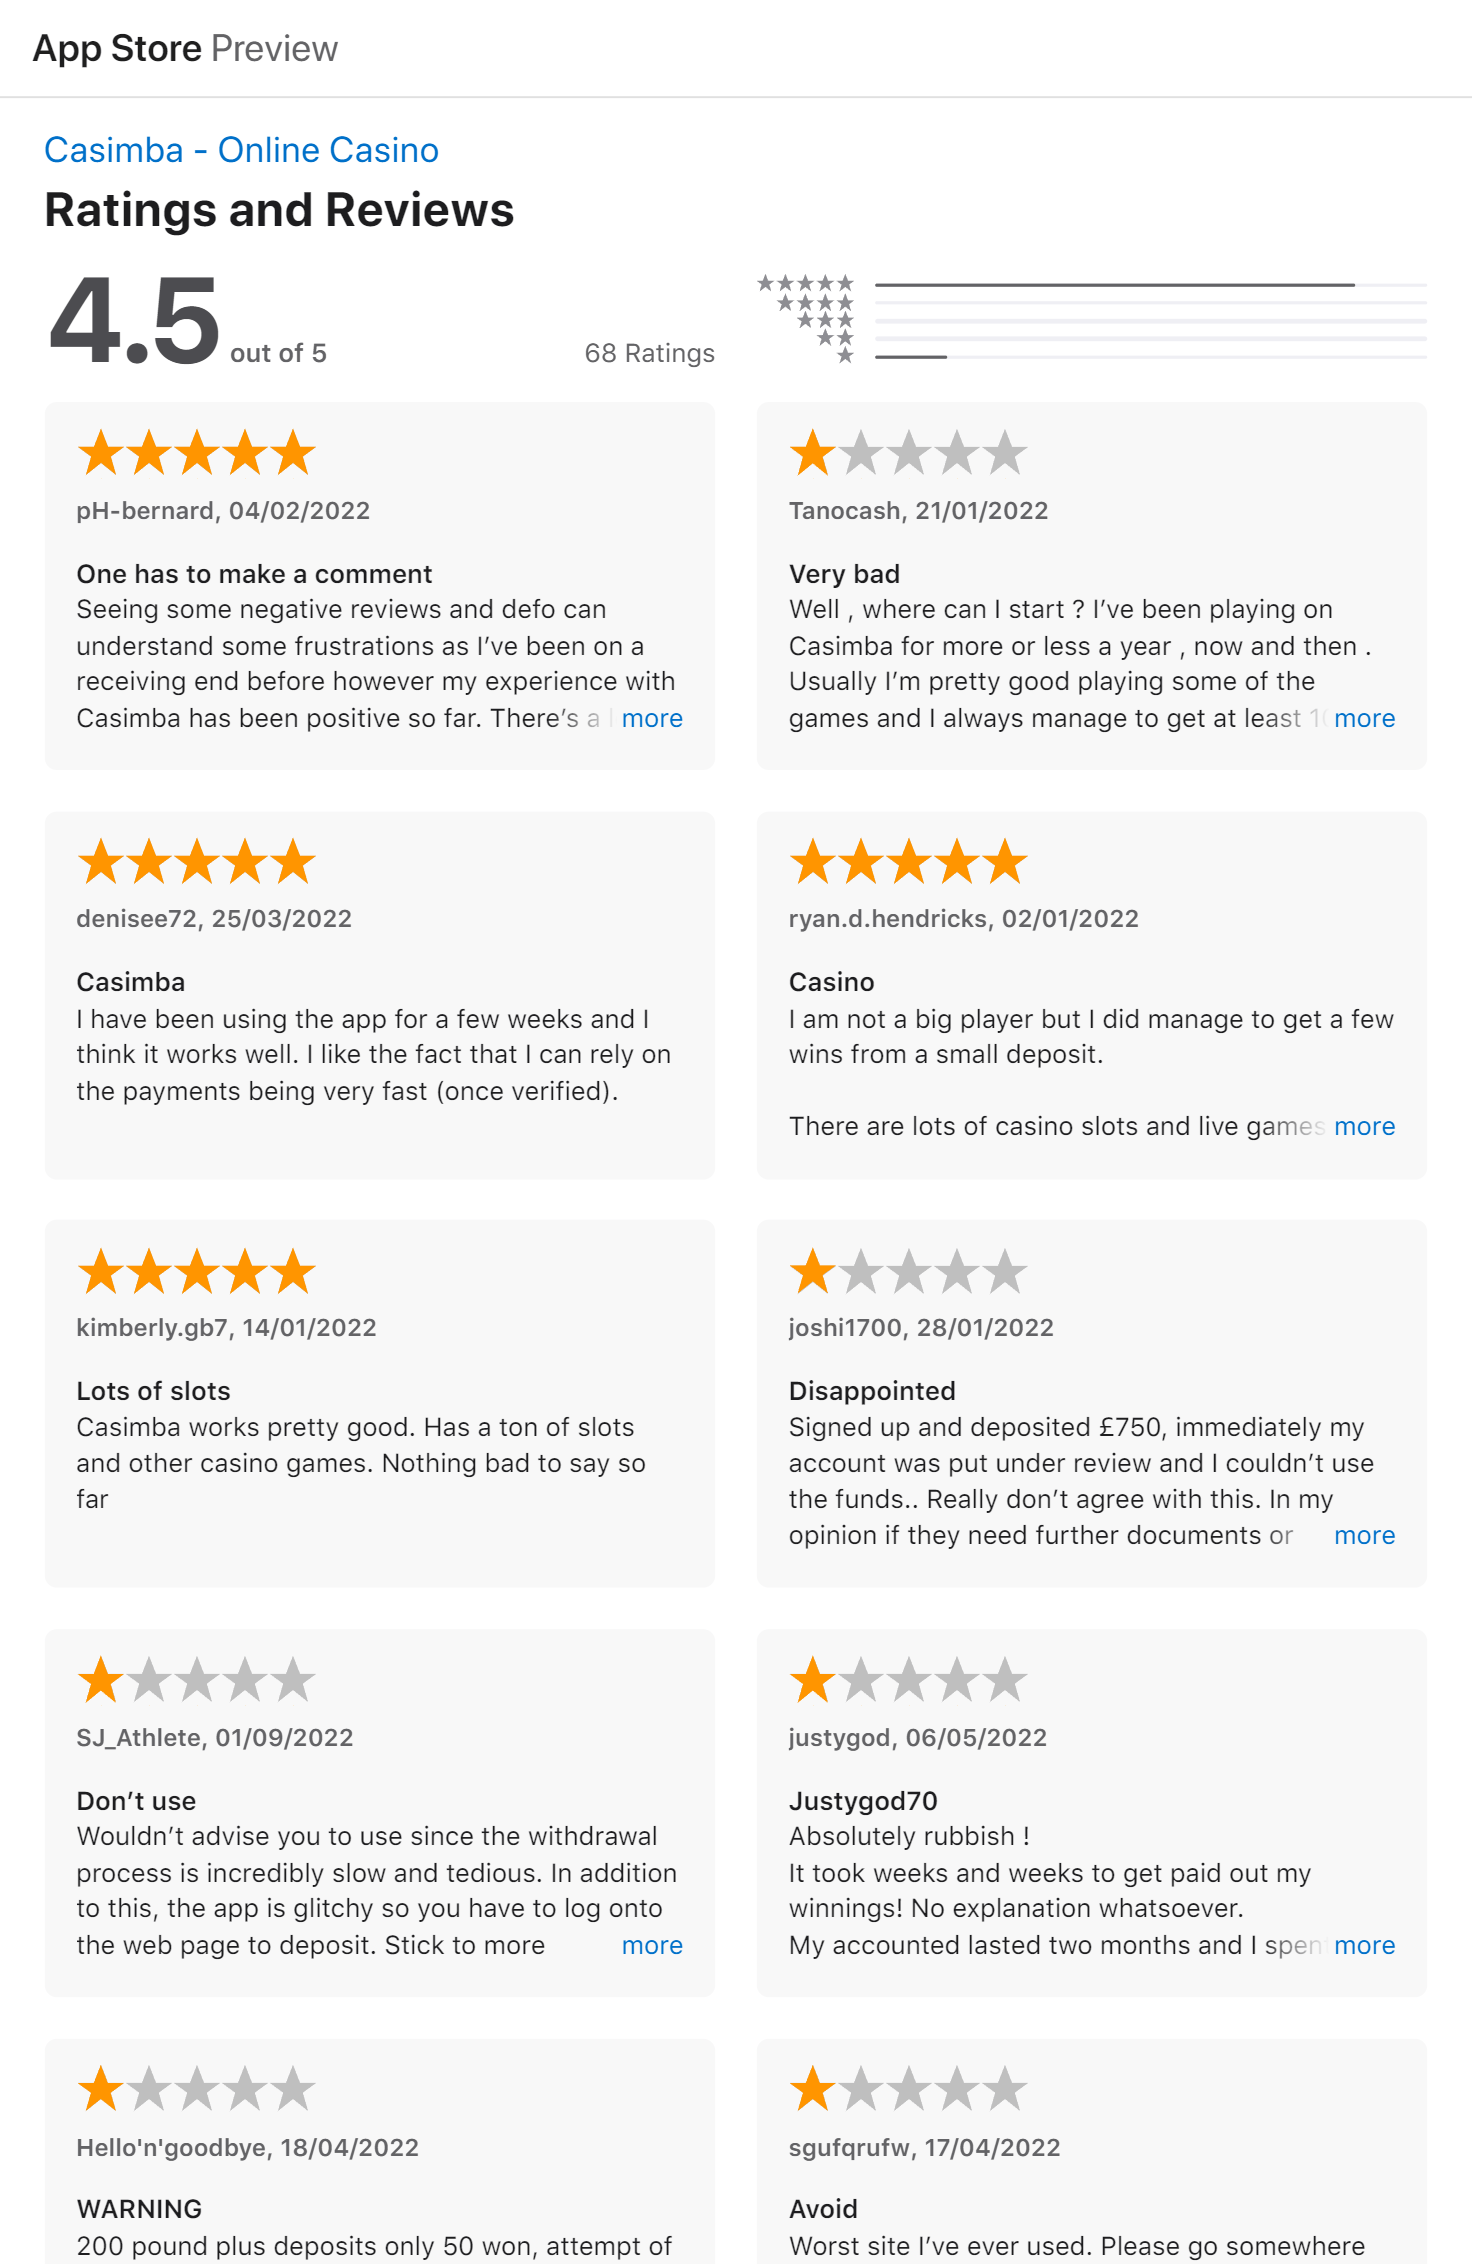 Apple App store ratings and reviews for the Casimba